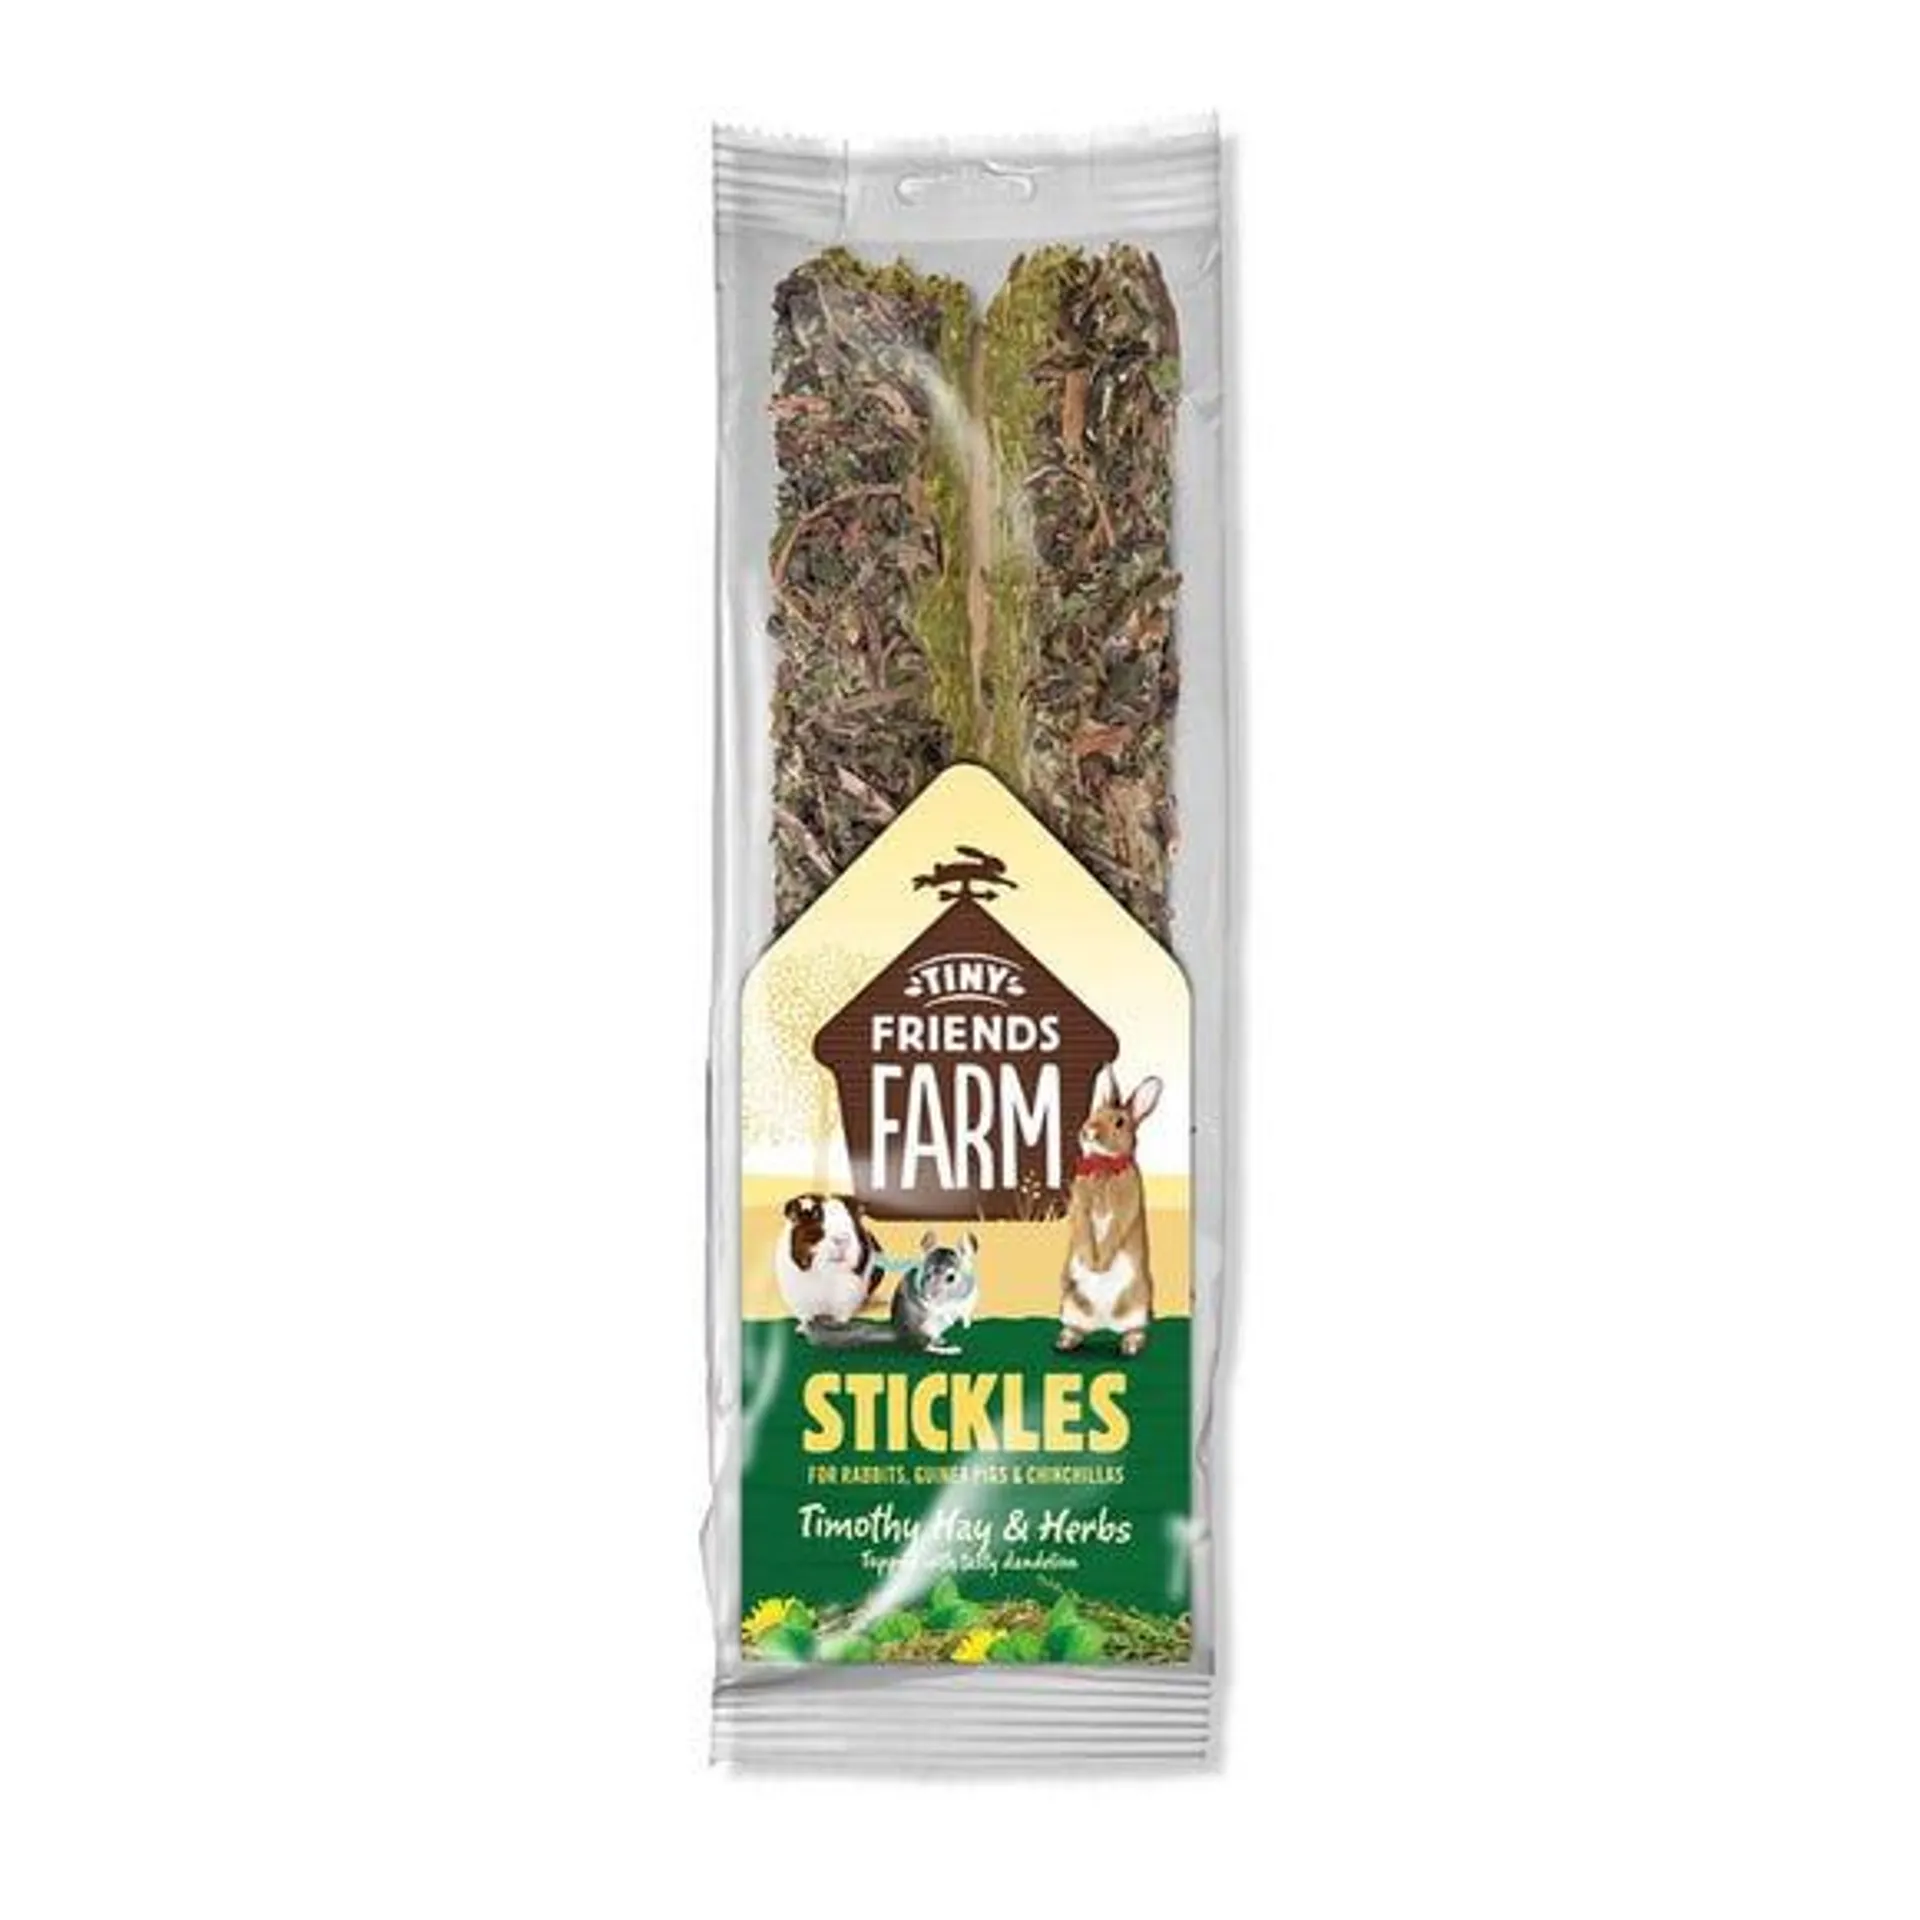 TFF Stickles Timothy Hay & Herbs 100g